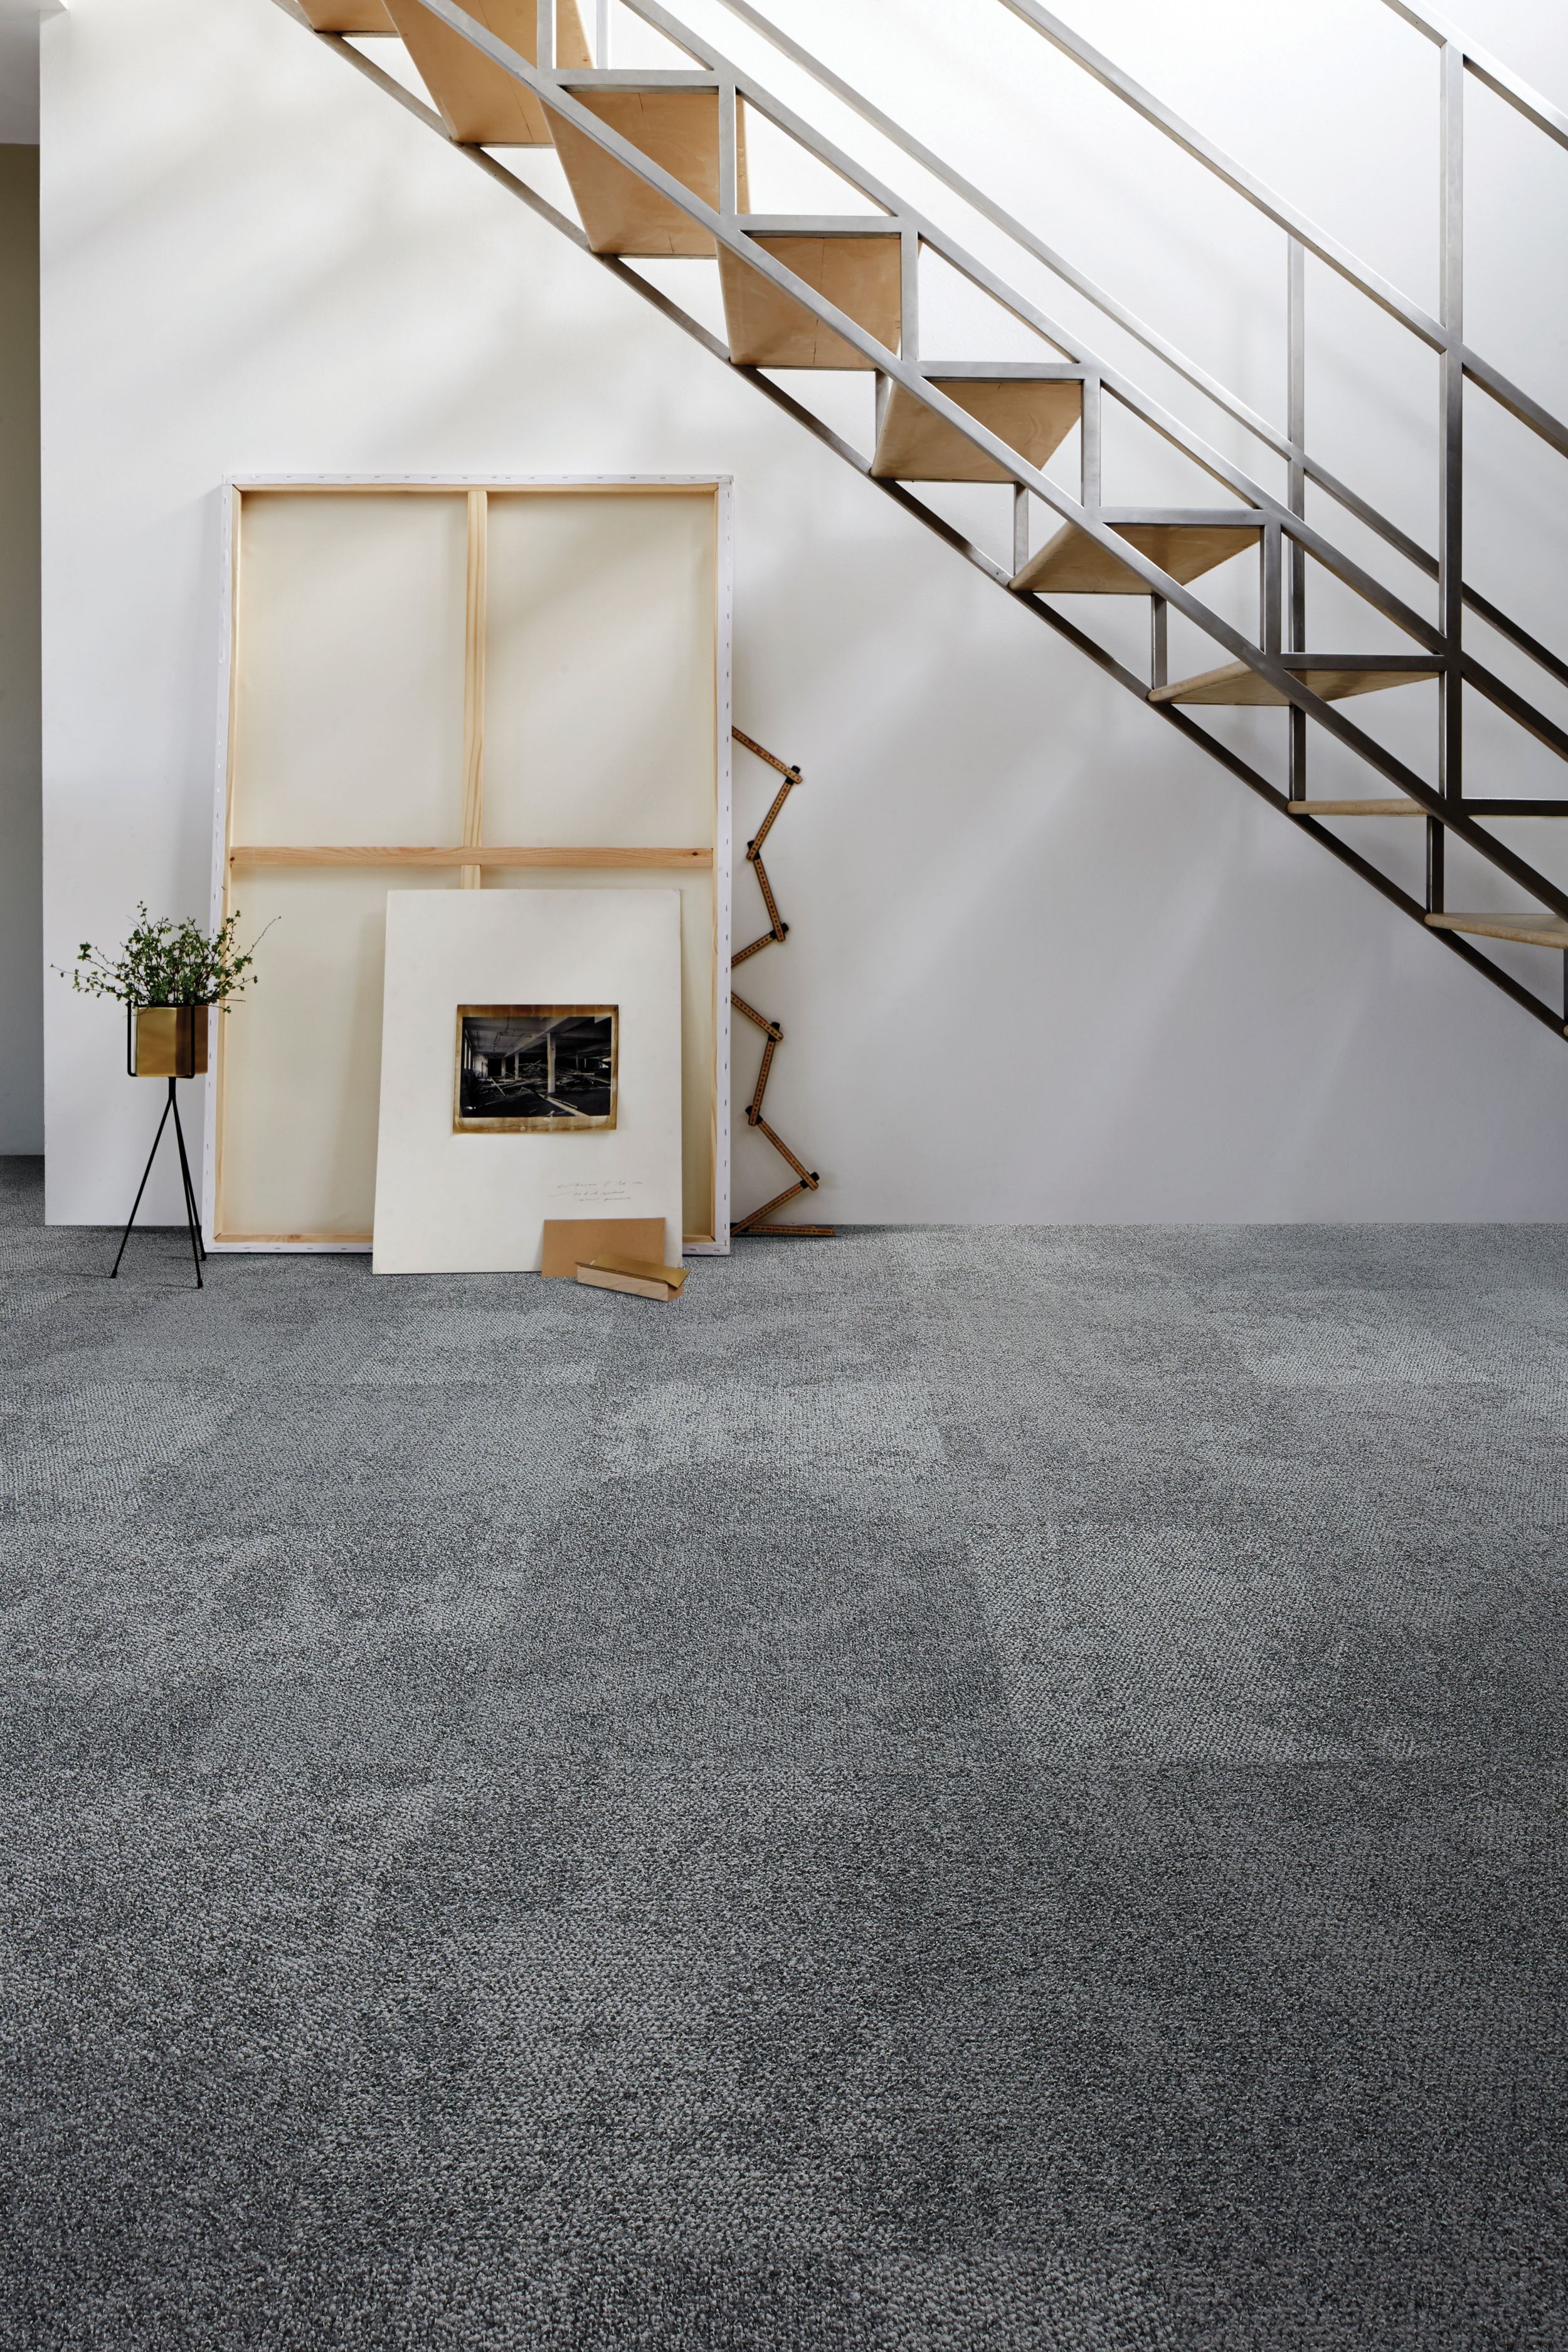 Interface Composure carpet tile with stairs in background numéro d’image 3